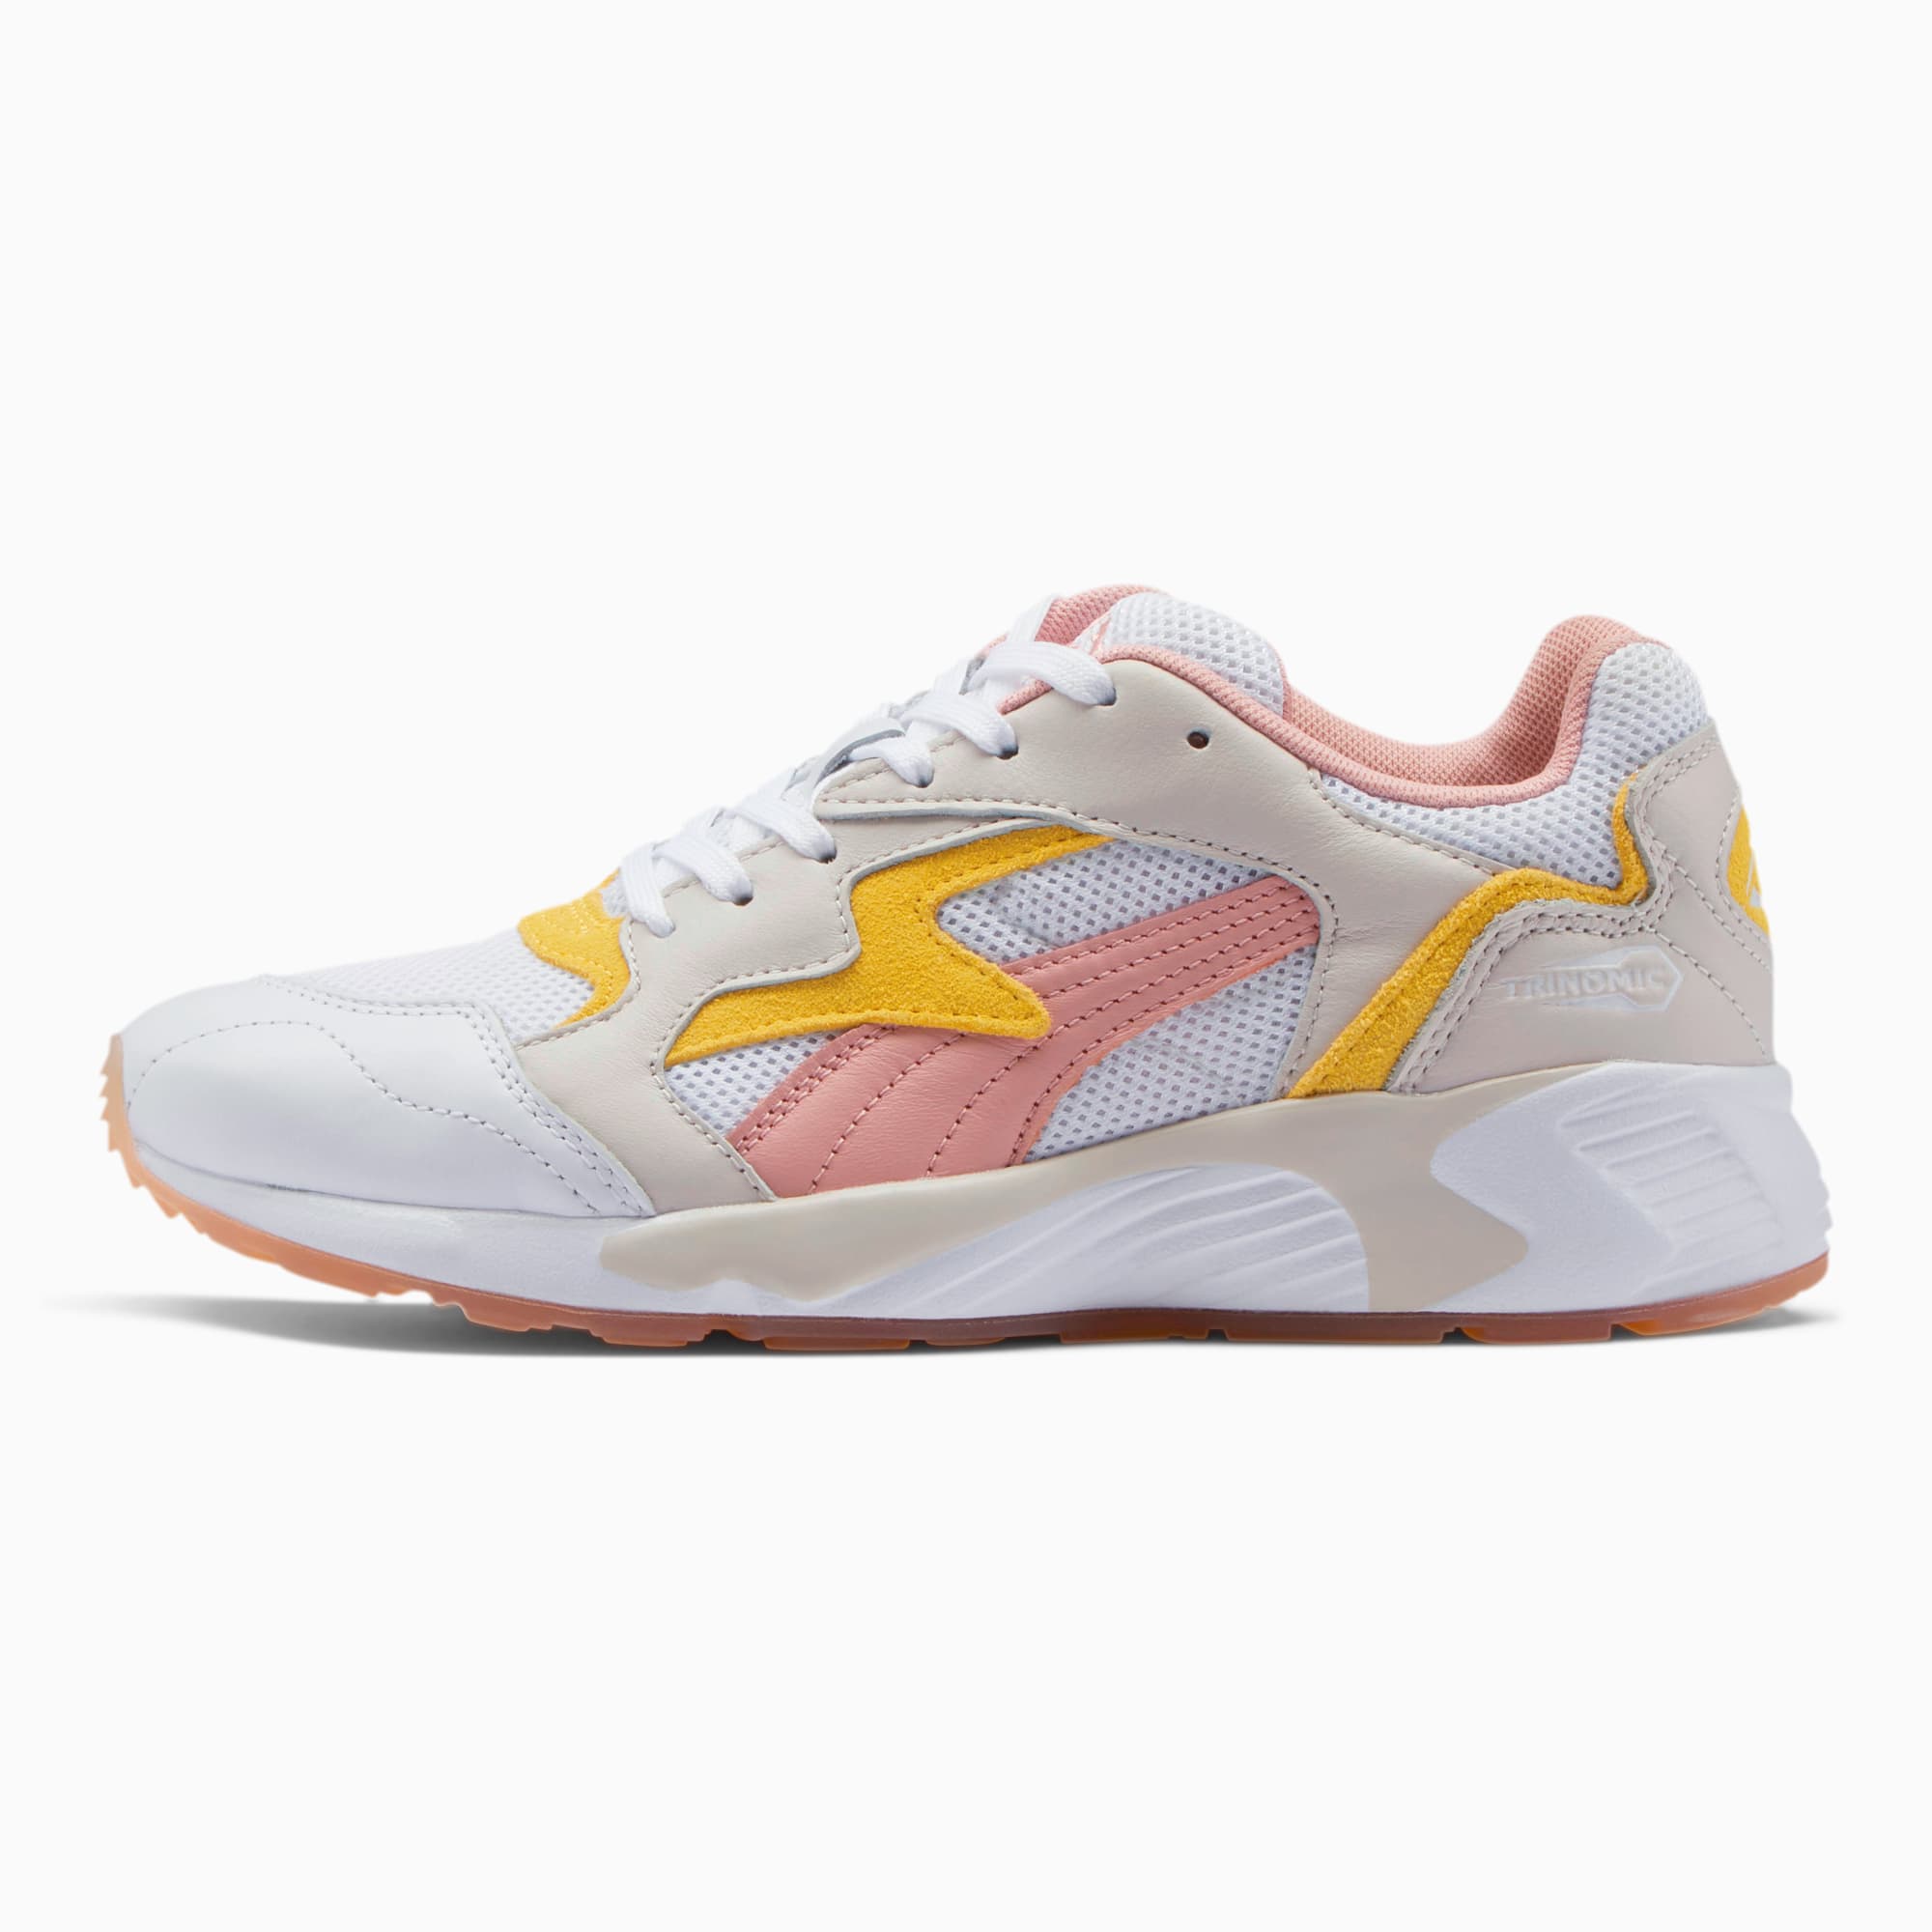 Prevail Classic Women's Sneakers | PUMA US